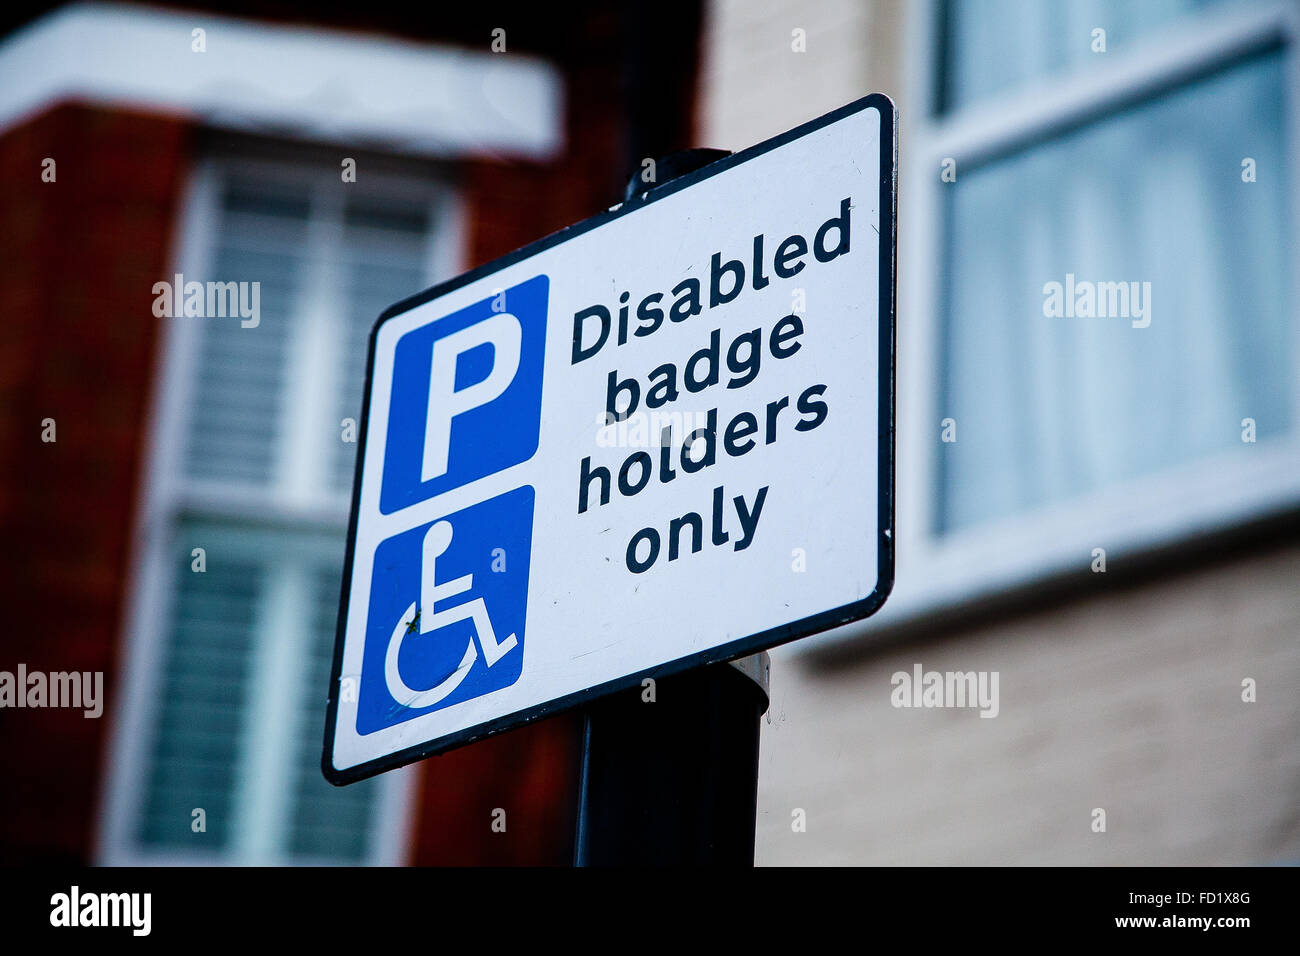 Disable badge holder road sign Stock Photo